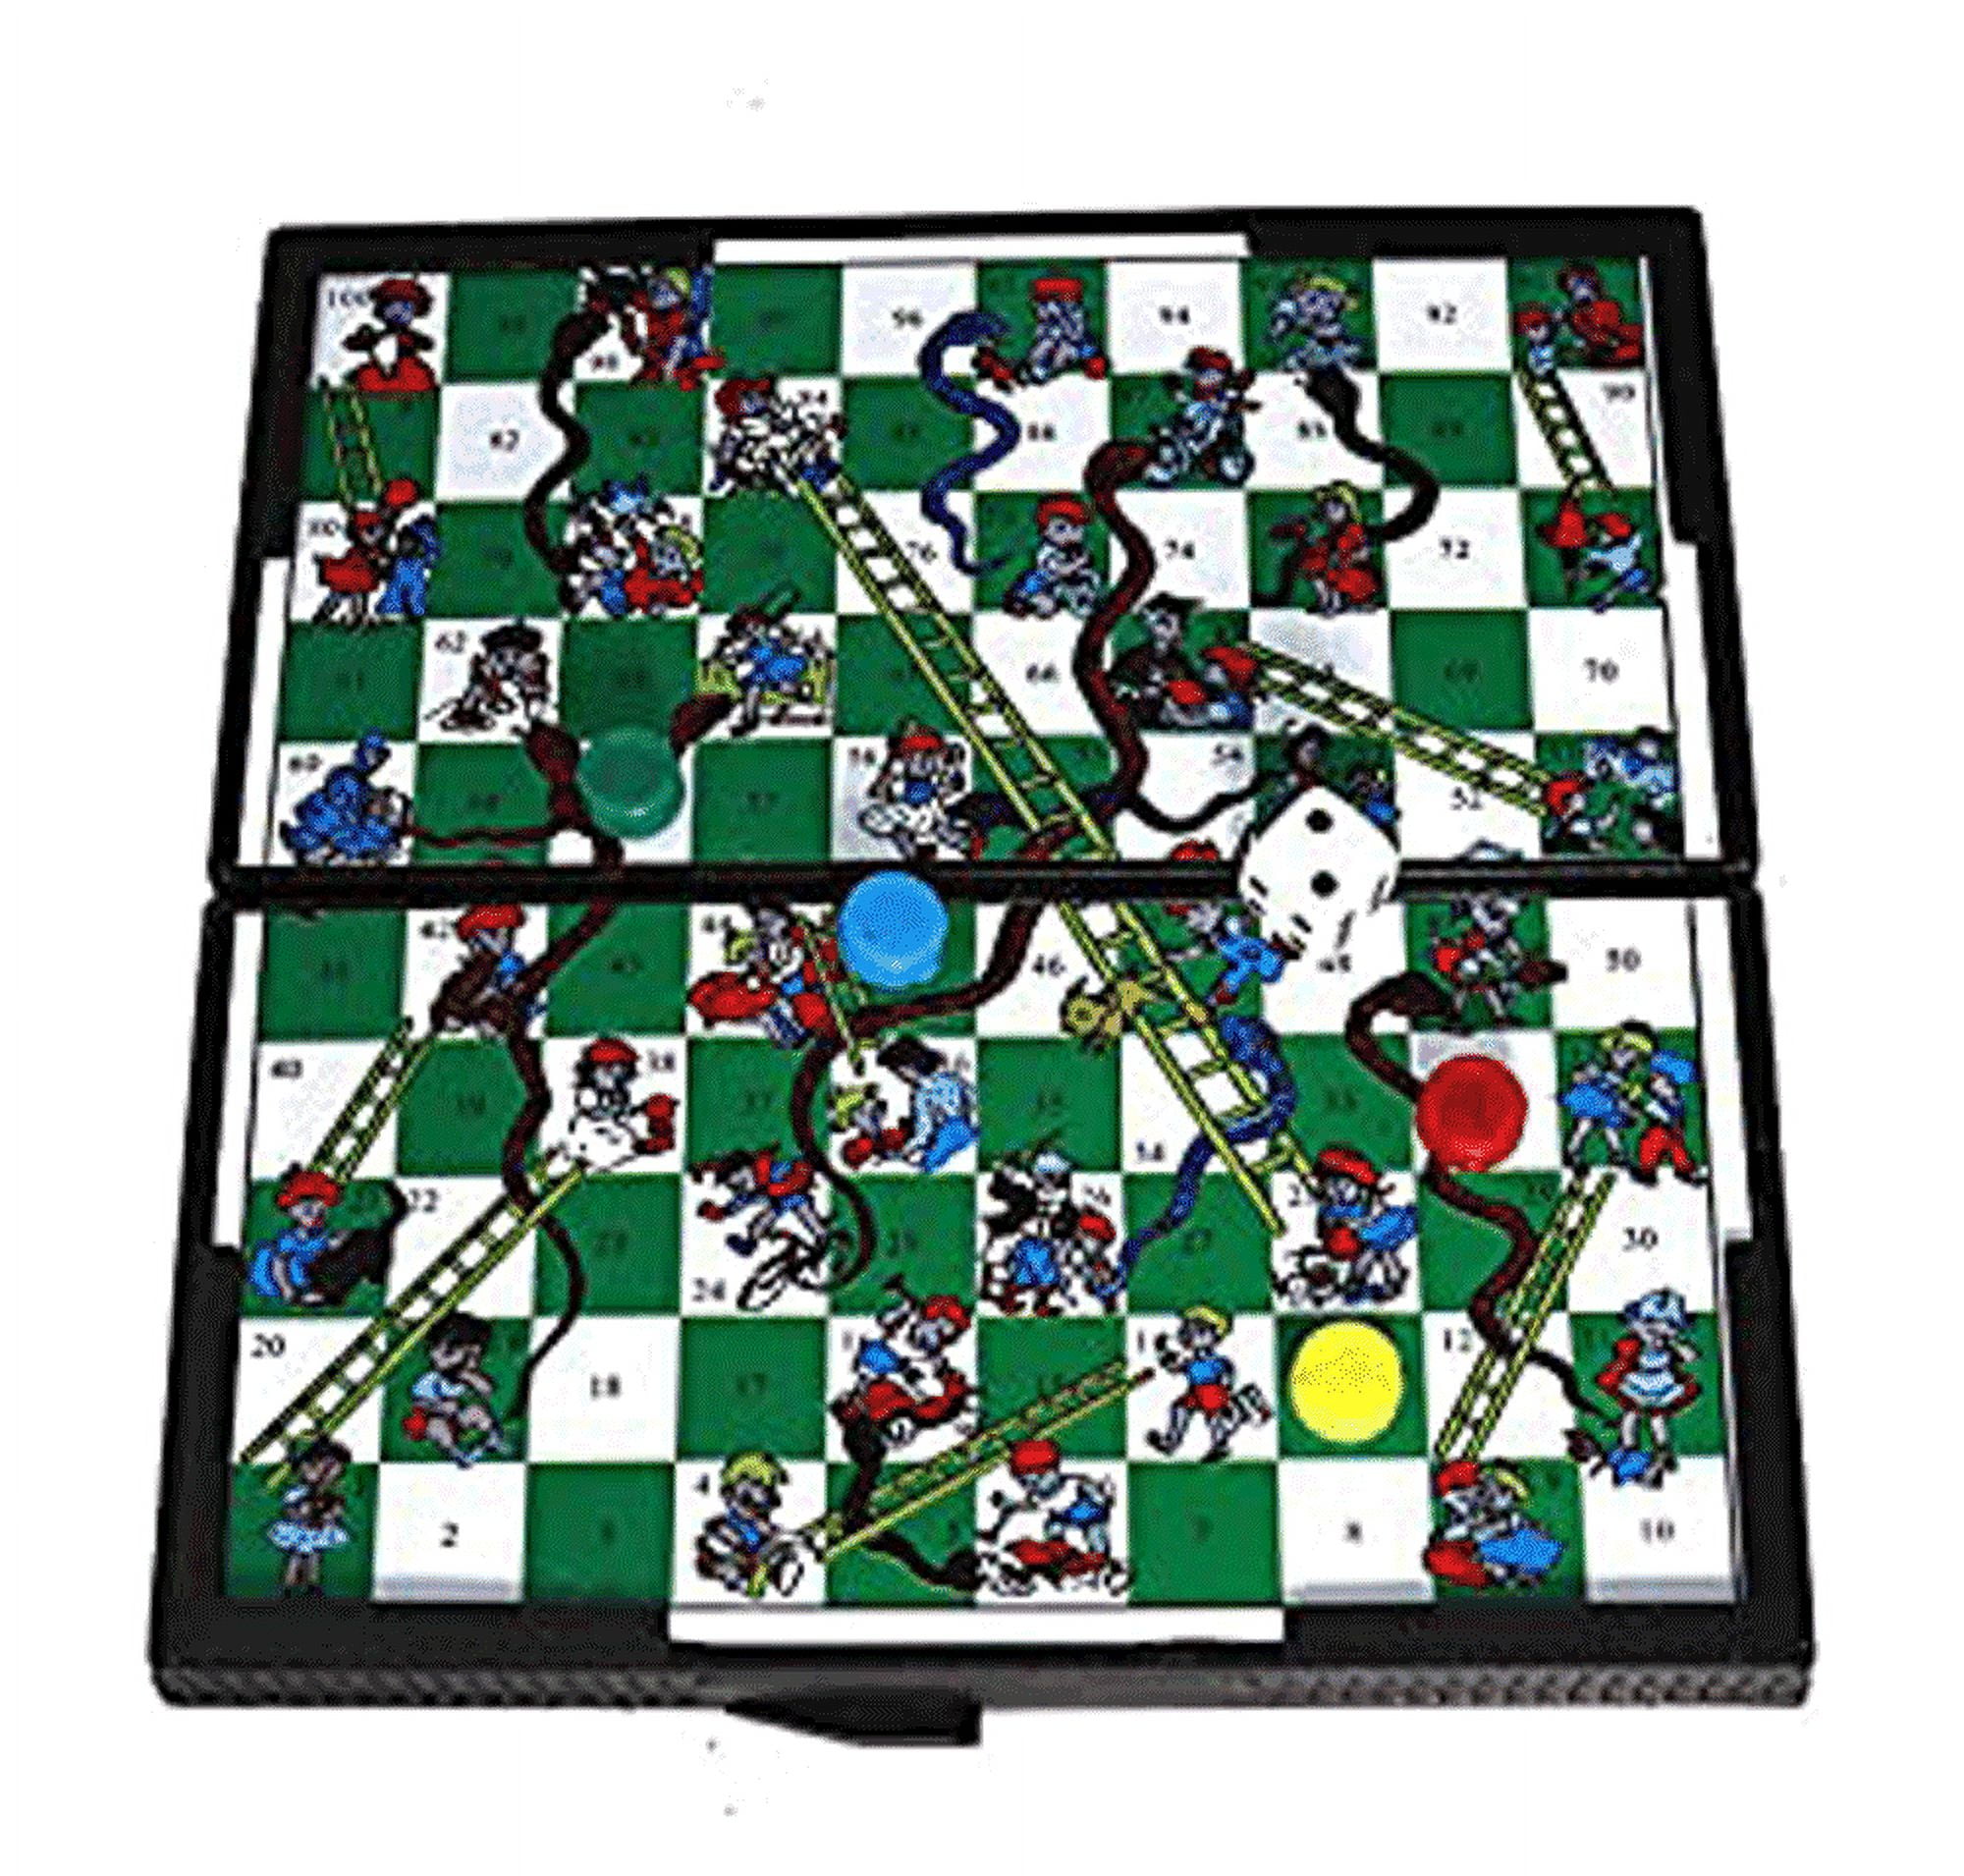 Pocket Magnetic Ludo Travel Game 1-4 players COMPLETE no349